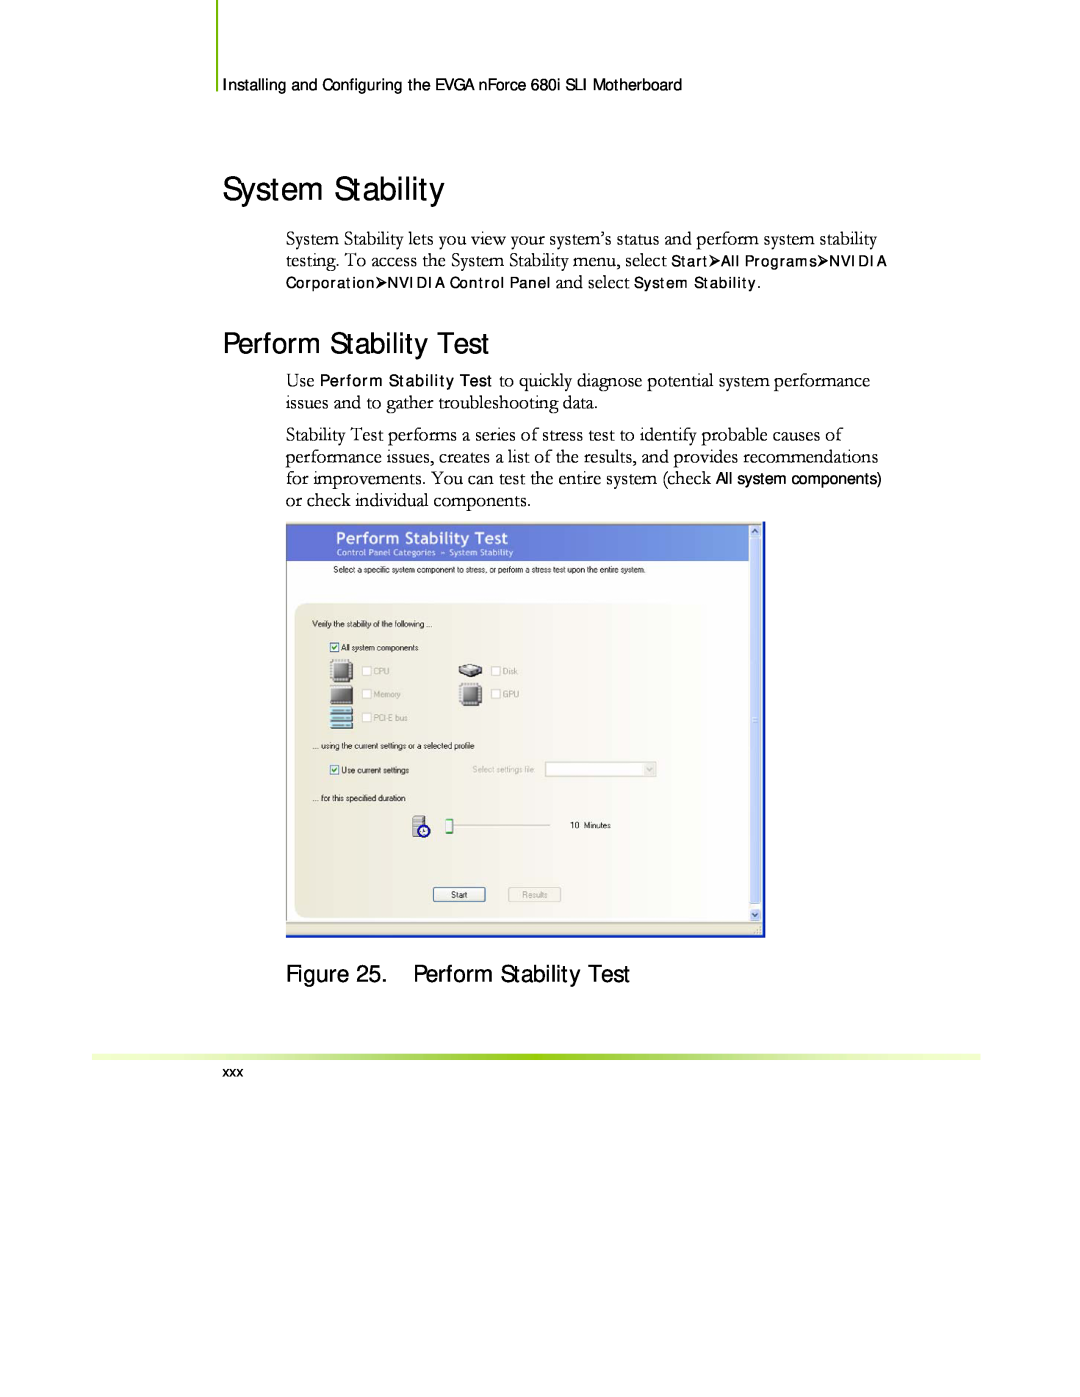 EVGA 122-CK-NF68-XX manual System Stability, Perform Stability Test 